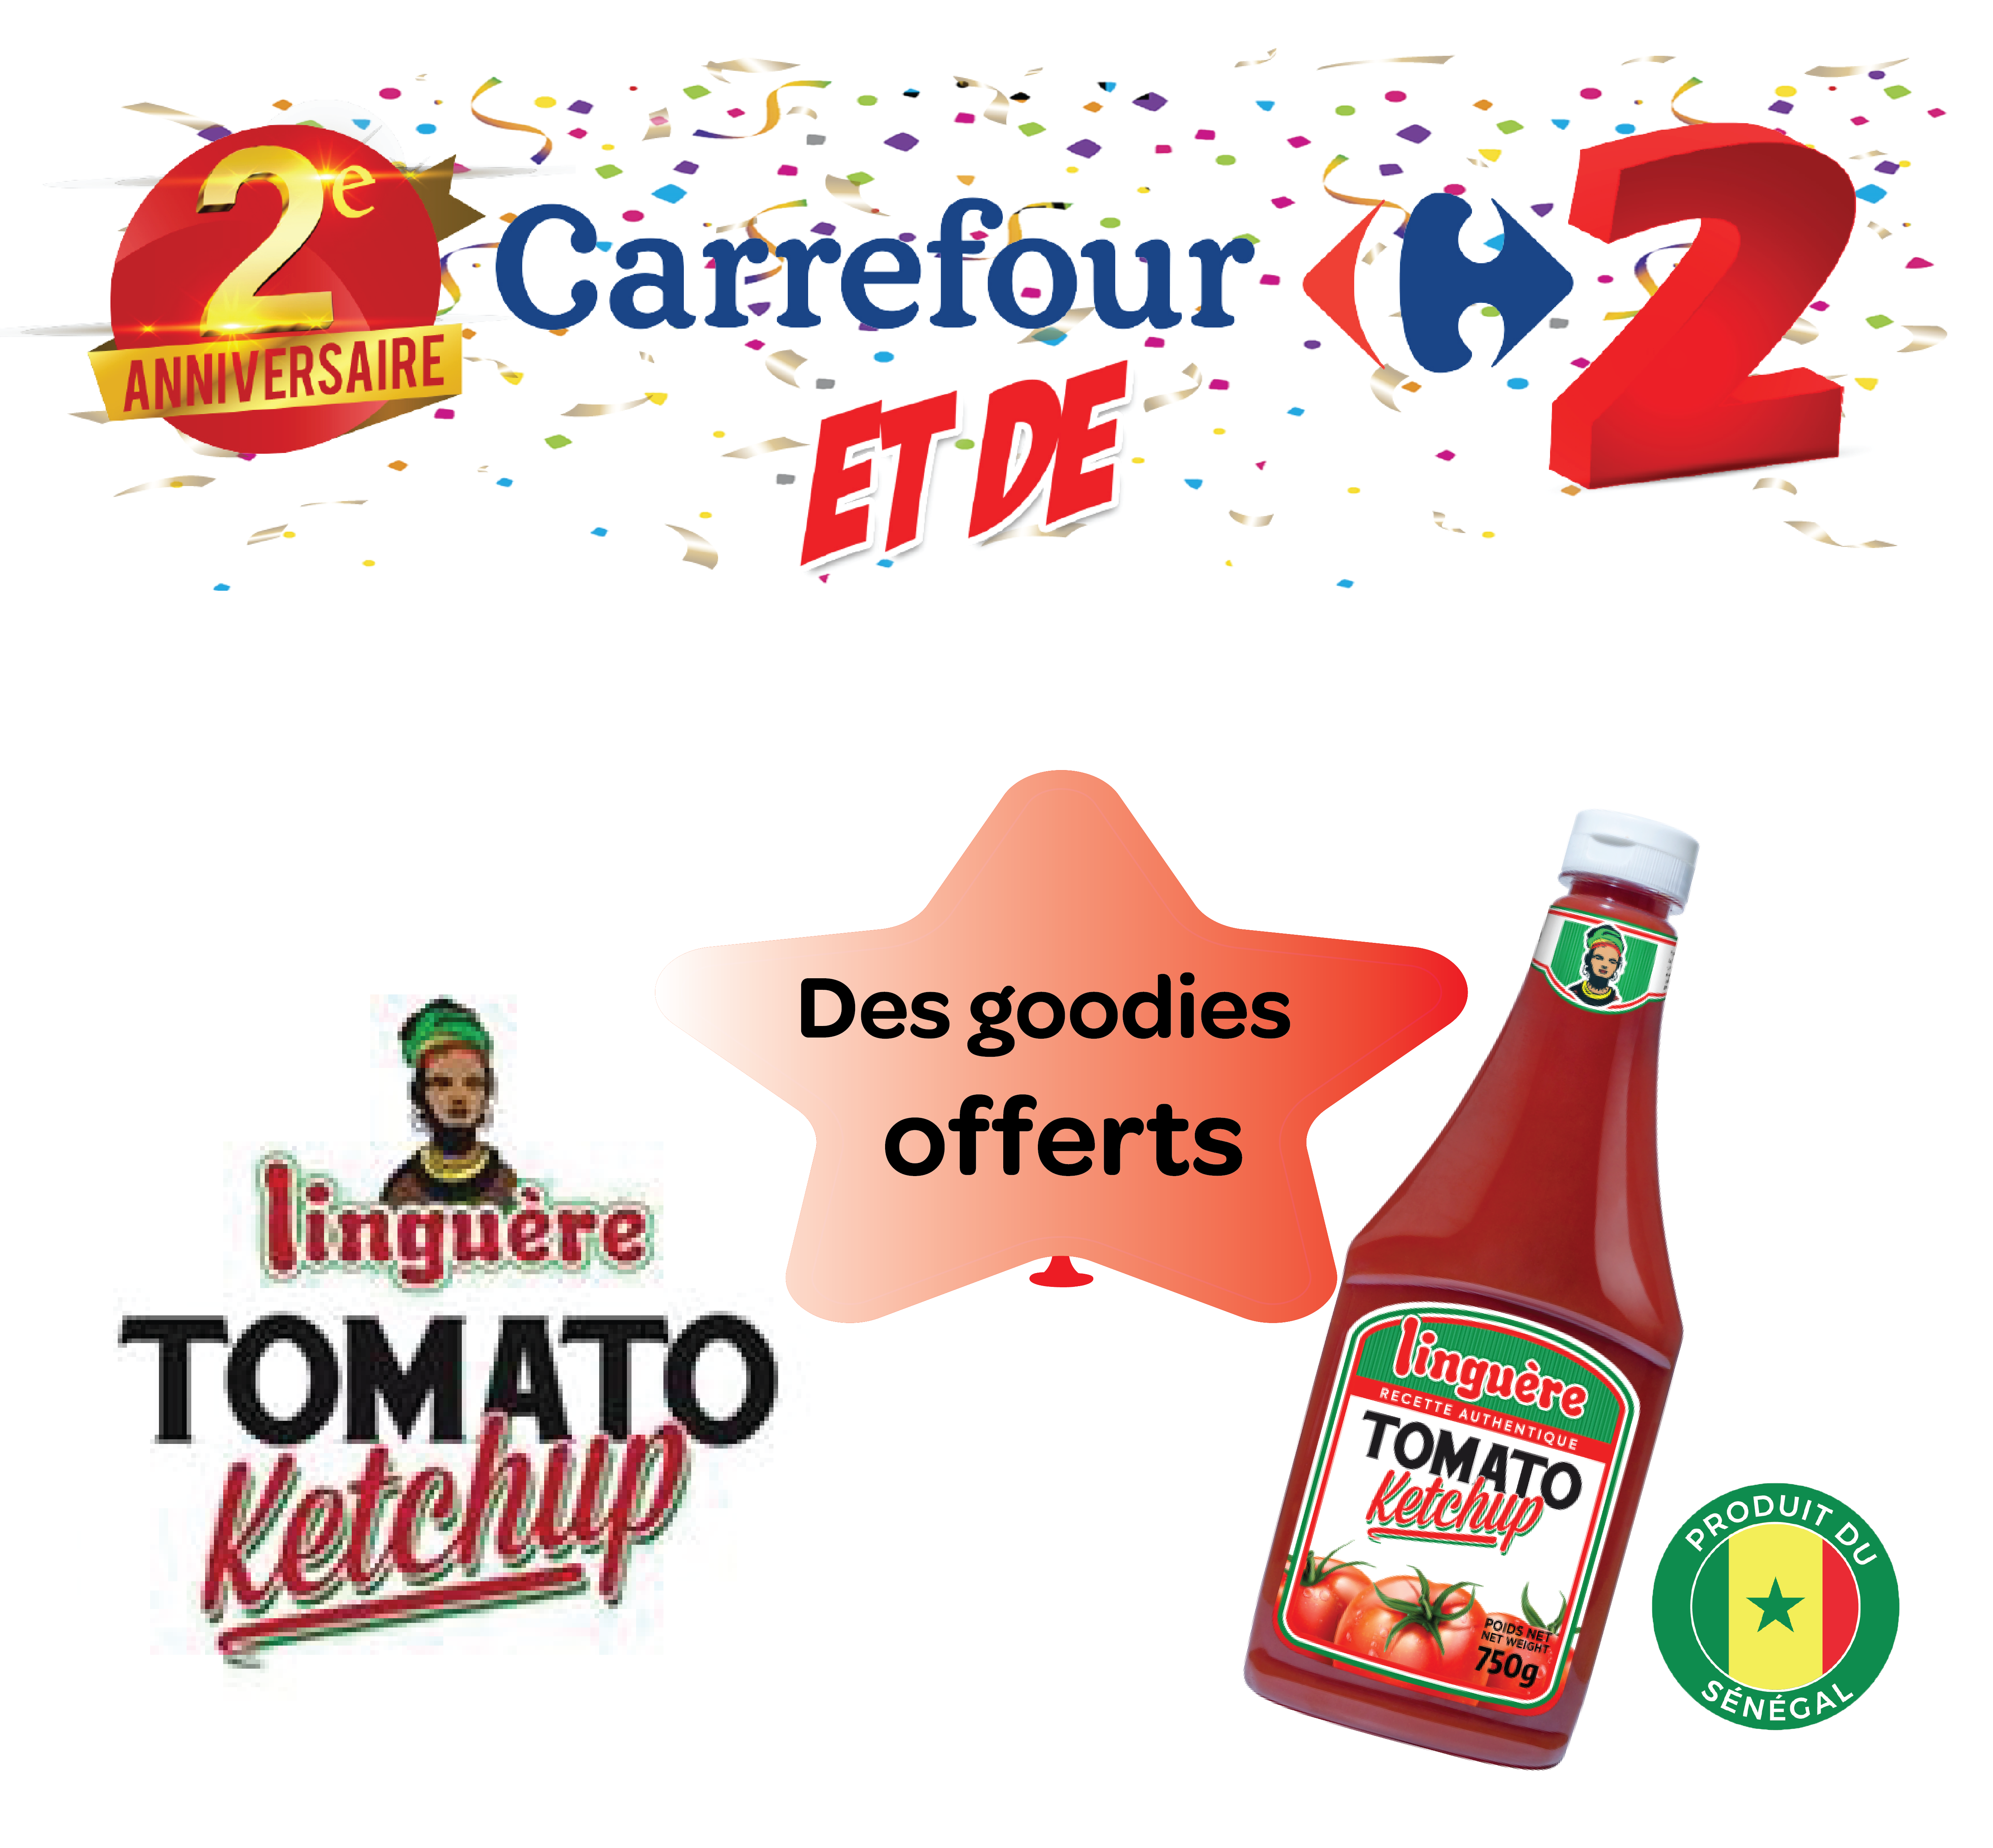 Tomate Ketchup Linguere 750g